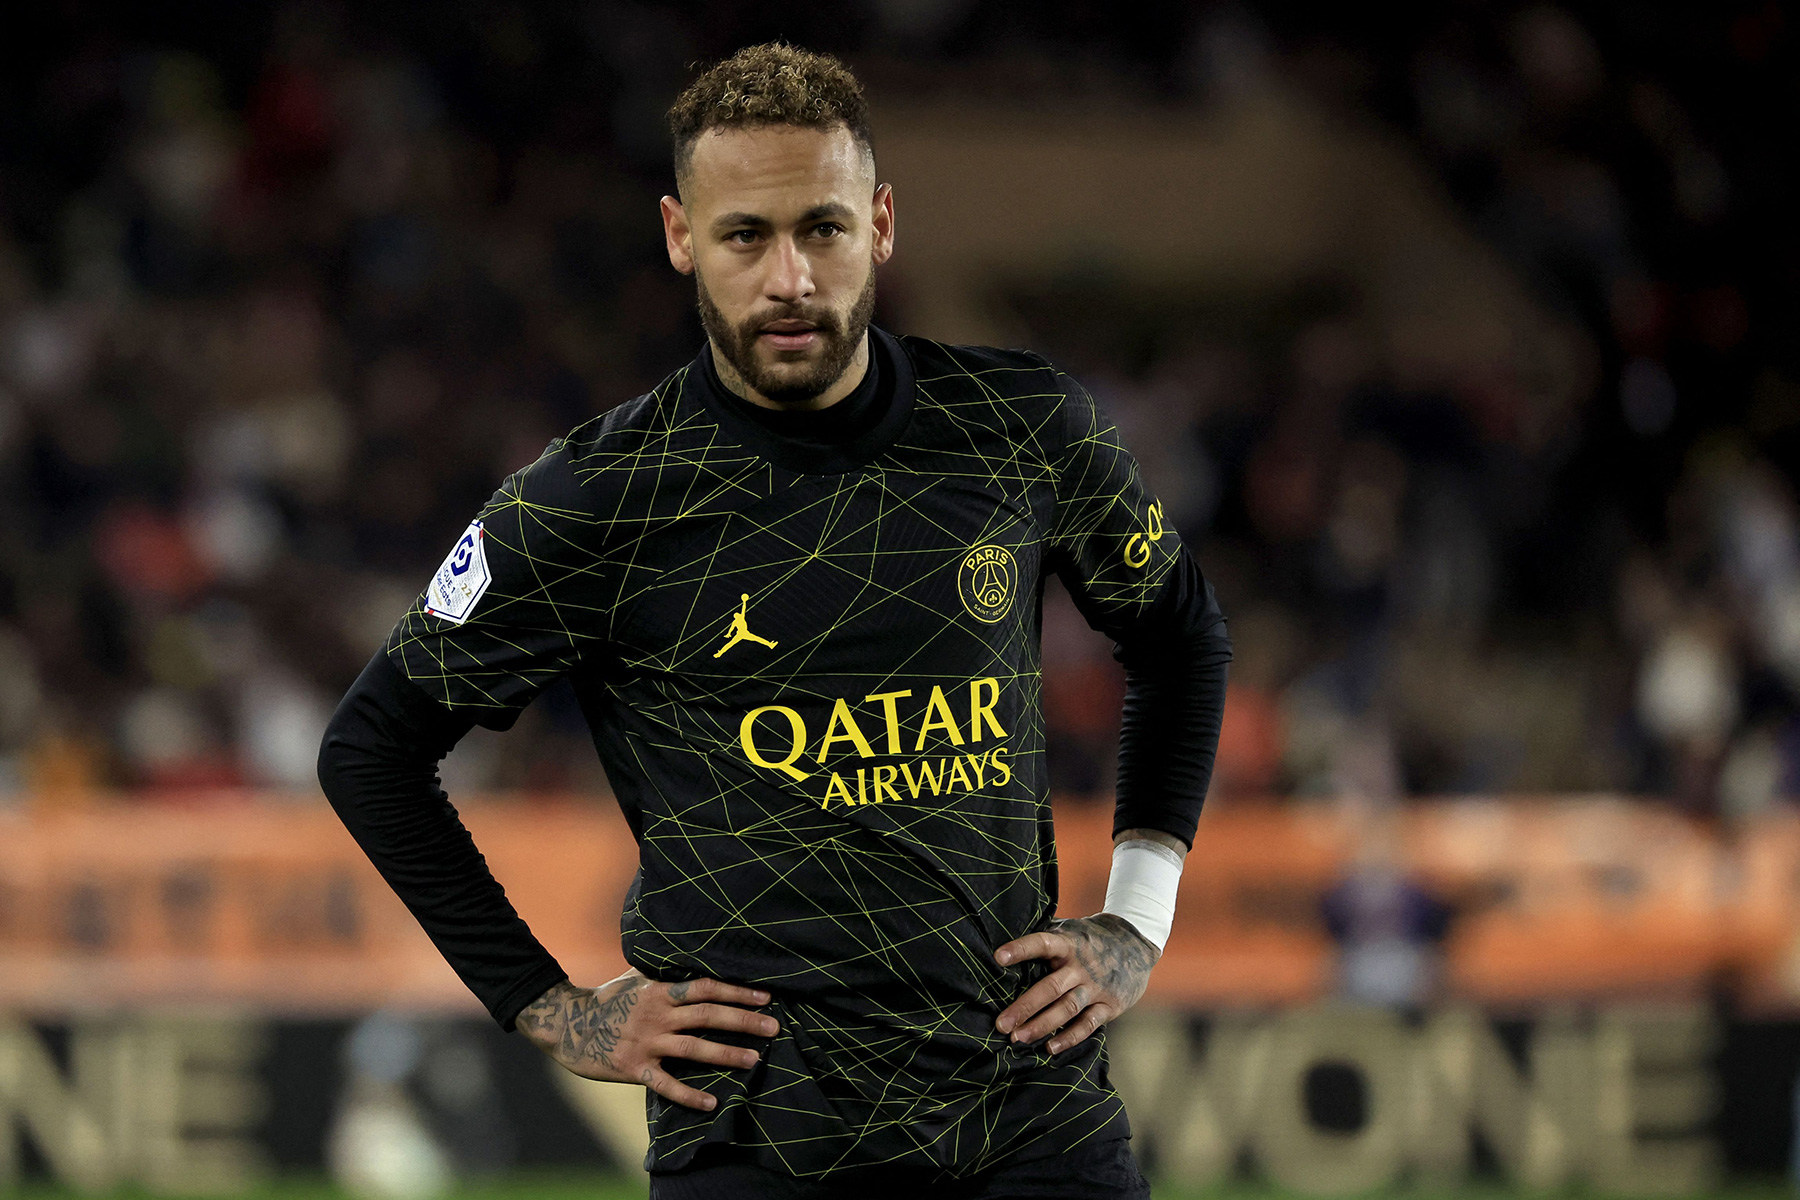 Settled at last, Neymar ready to deliver for PSG